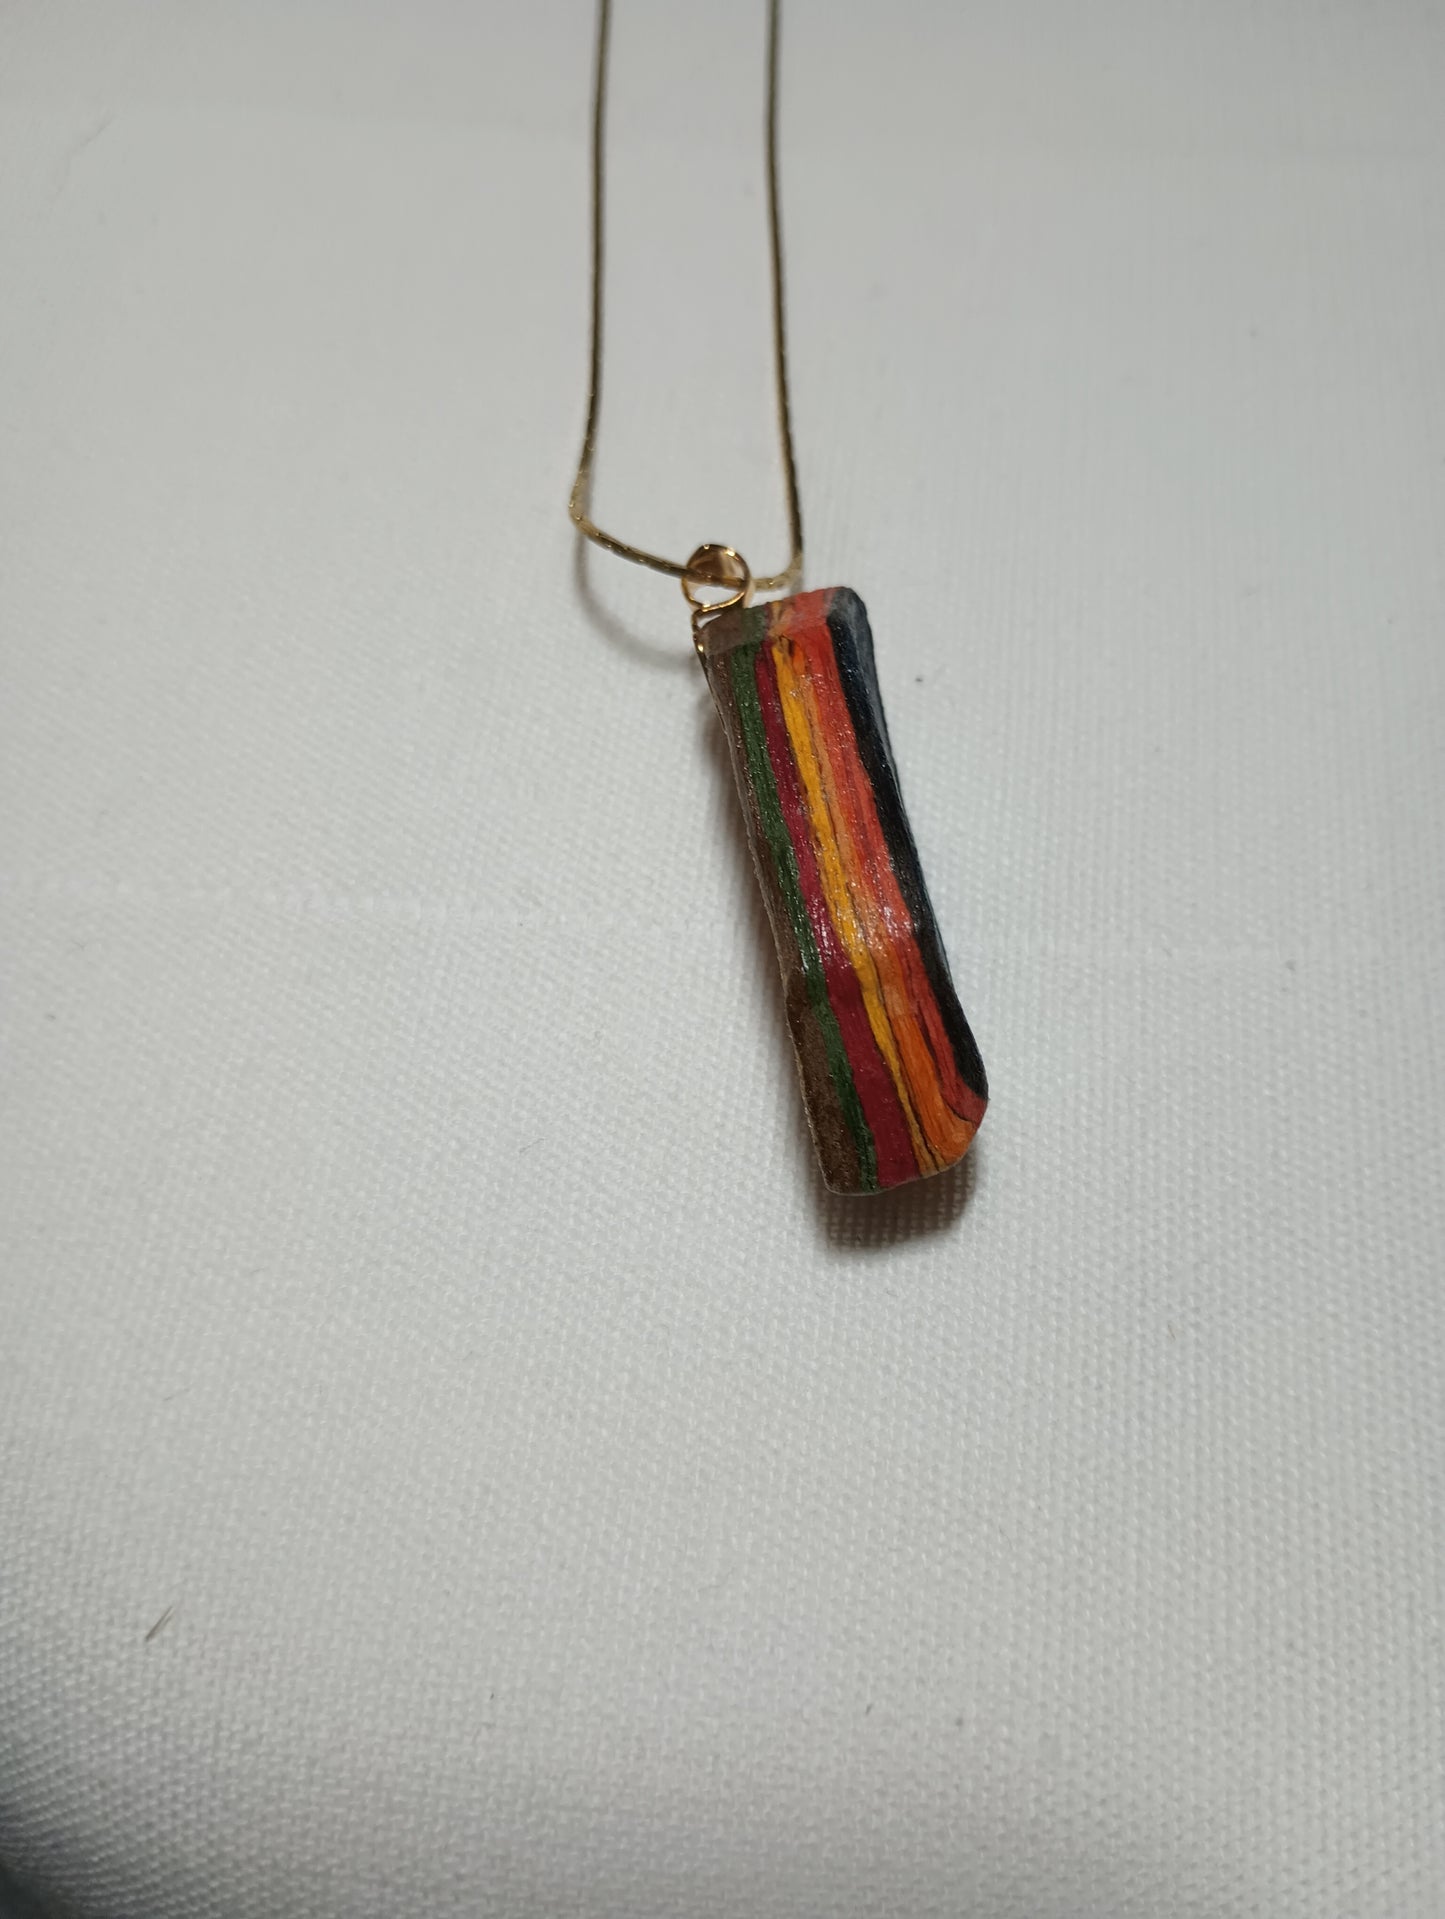 Construction Paper Pendant, Handmade, One-of-a-kind